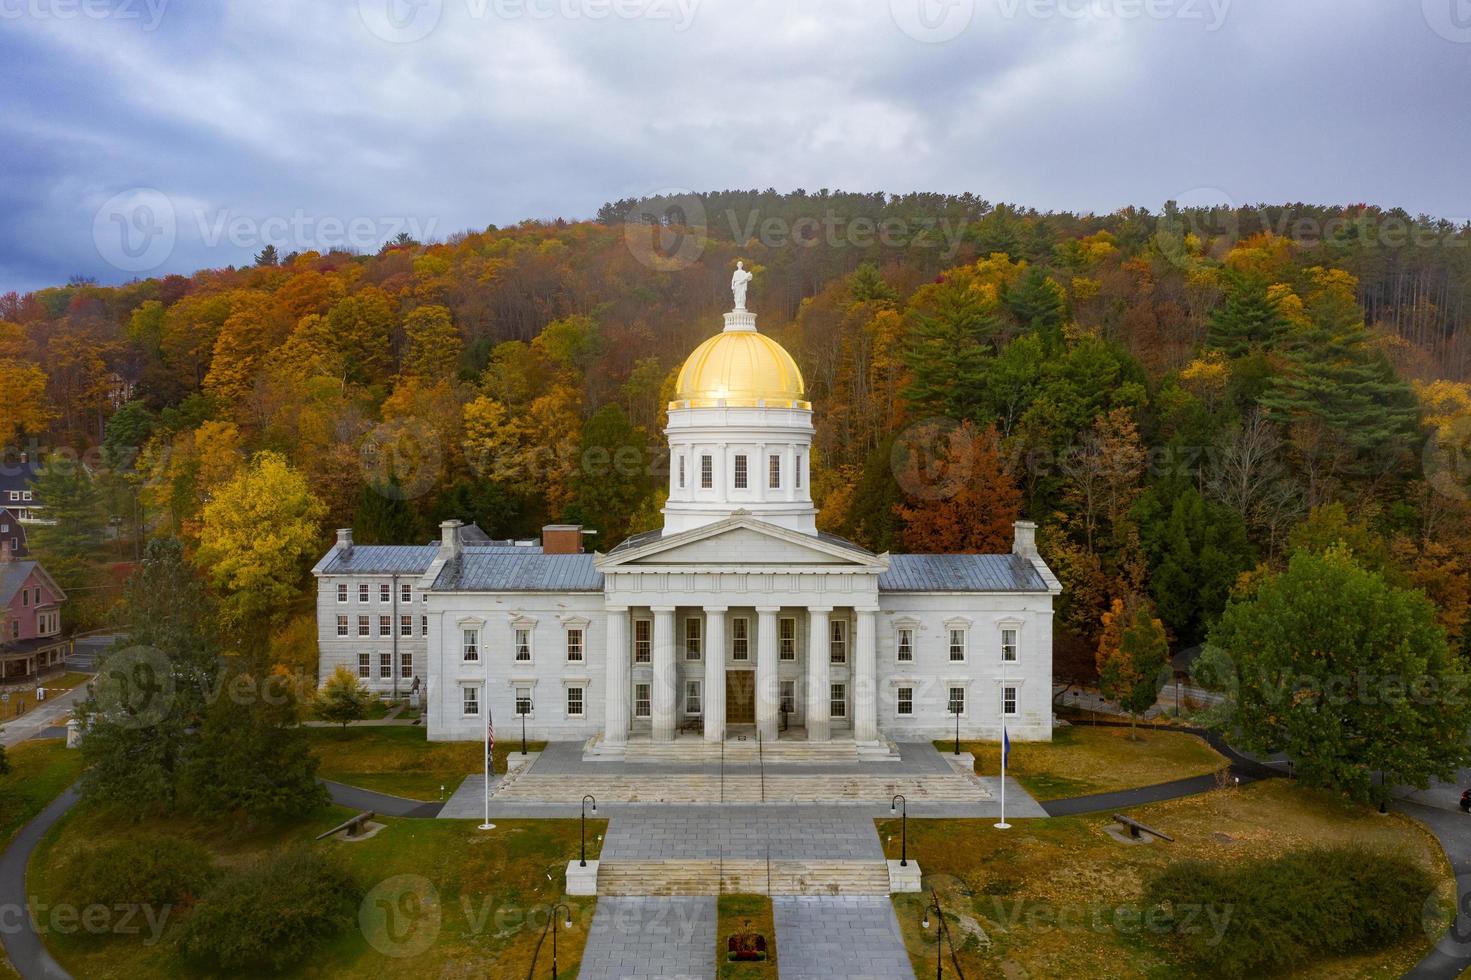 The State Capitol Building in Montpelier Vermont, USA. The current Greek Revival structure is the third building on the same site to be used as the State House. It was occupied in 1859. photo